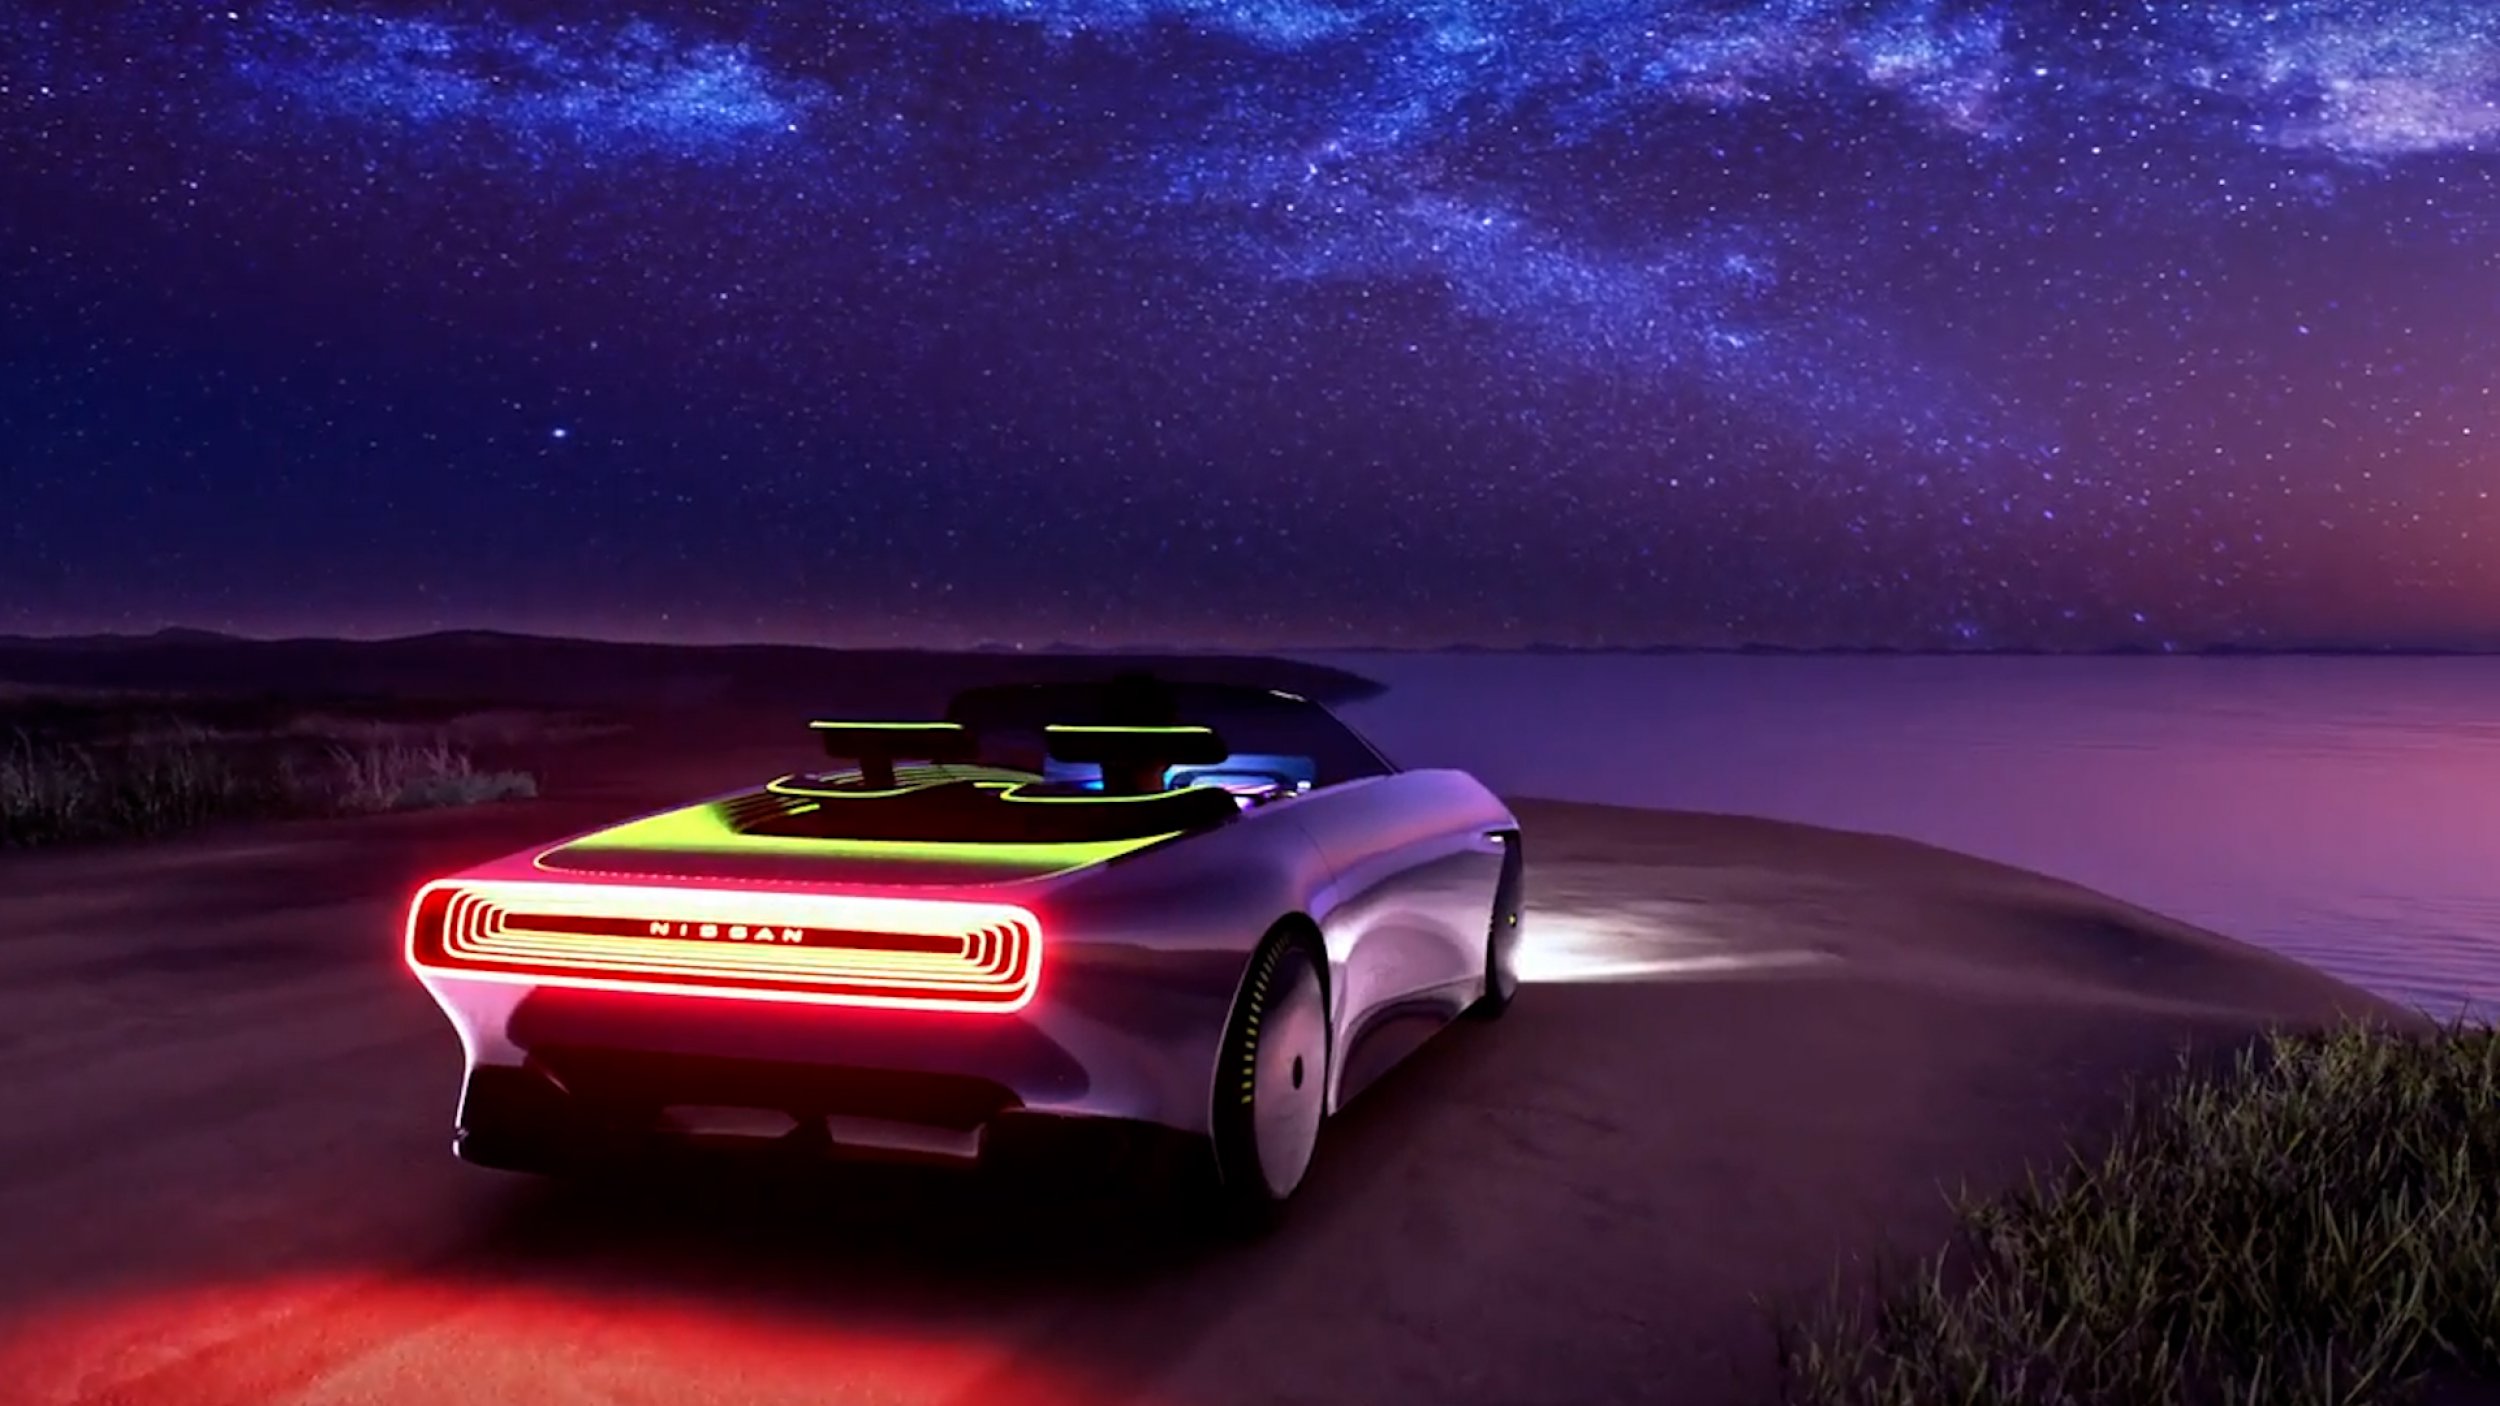 Nissans Futuristic Concept Cars Show Off Possibility Of New Electric Sports Car, Truck